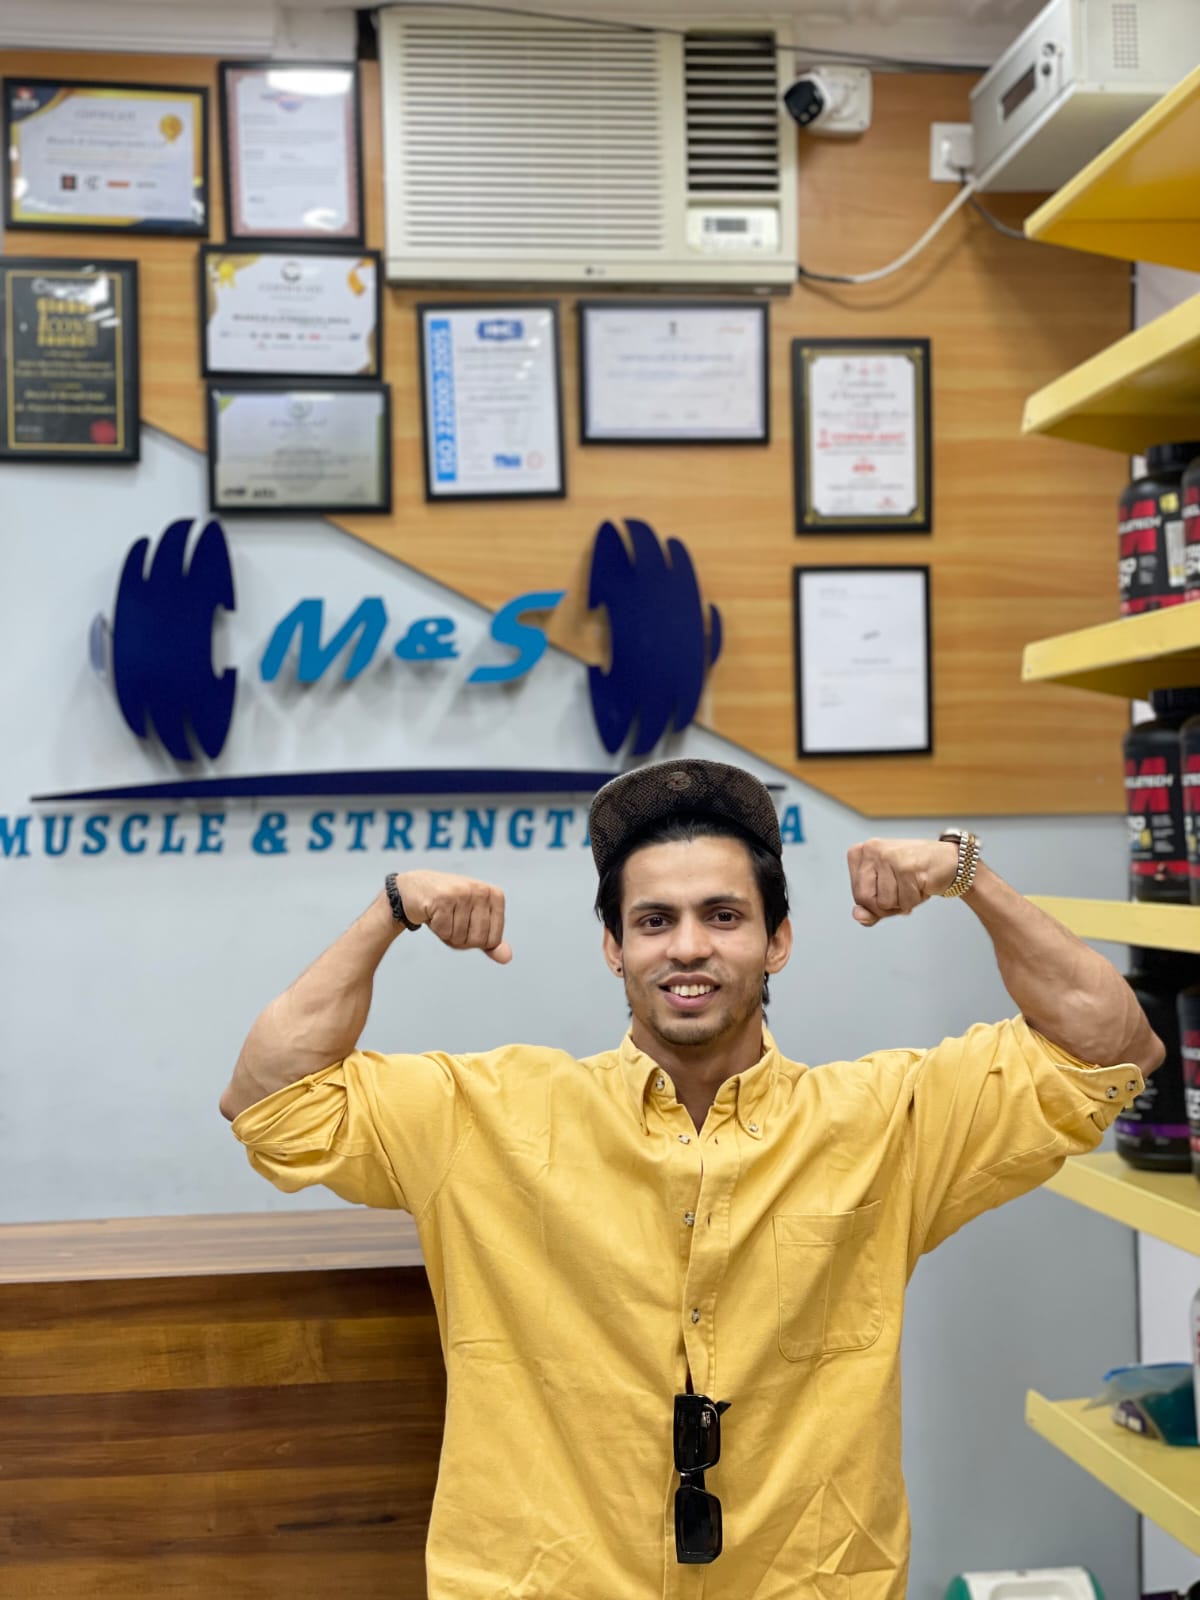 Renowned Fitness Model Mohmmad Iqbal inaugurates Muscle & Strength India stores in North India